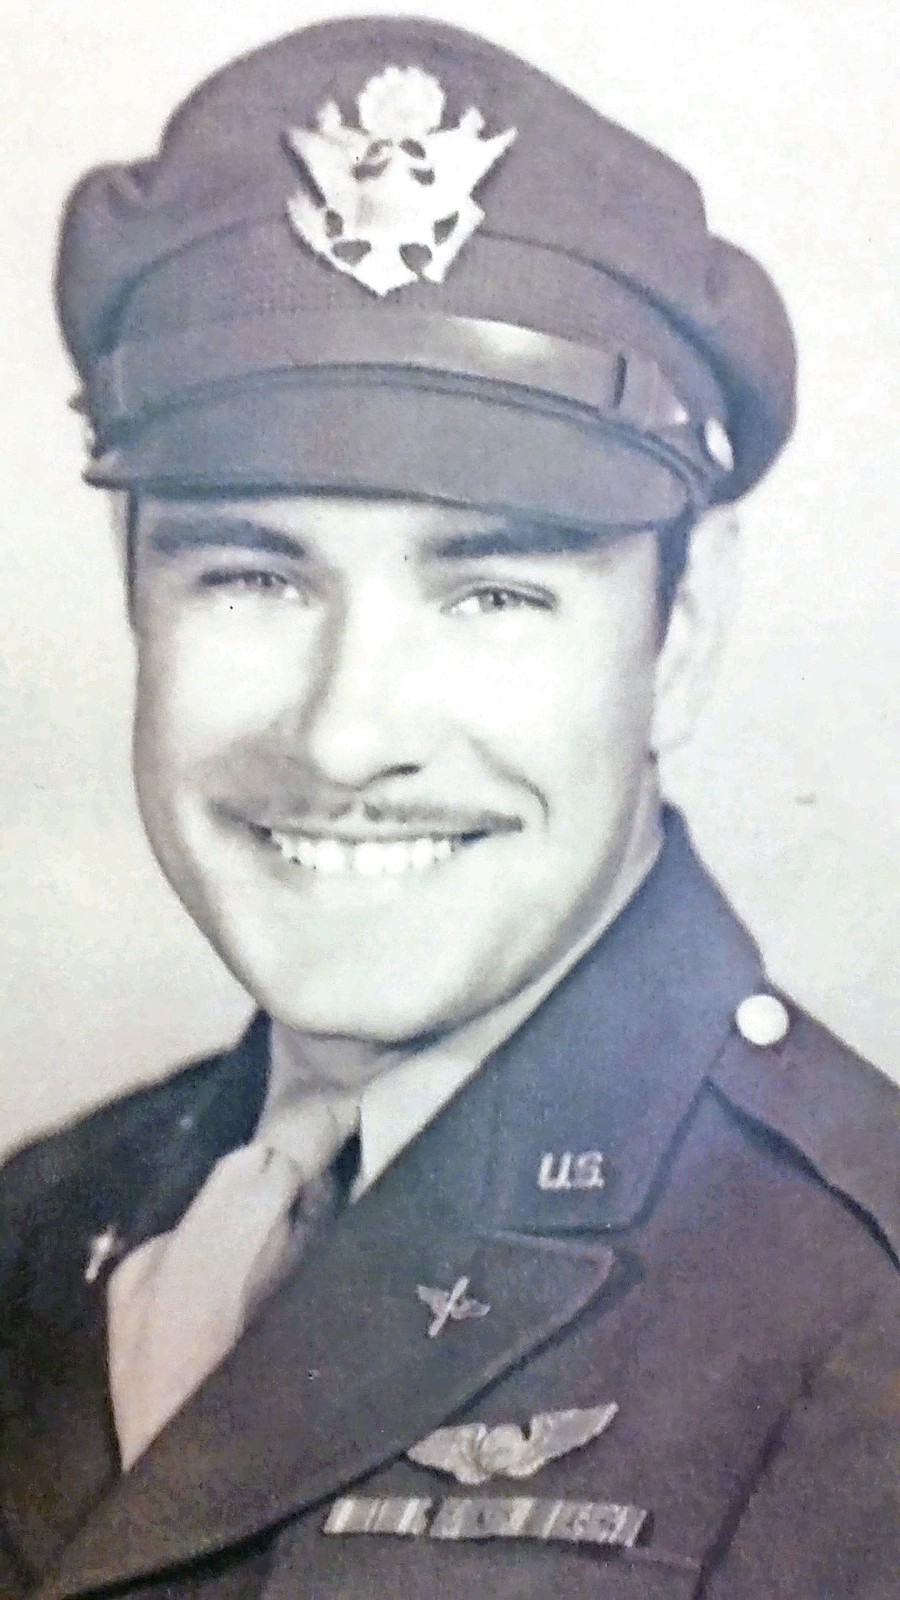 Captain Harold Smith during his years with the U.S. Air Force.